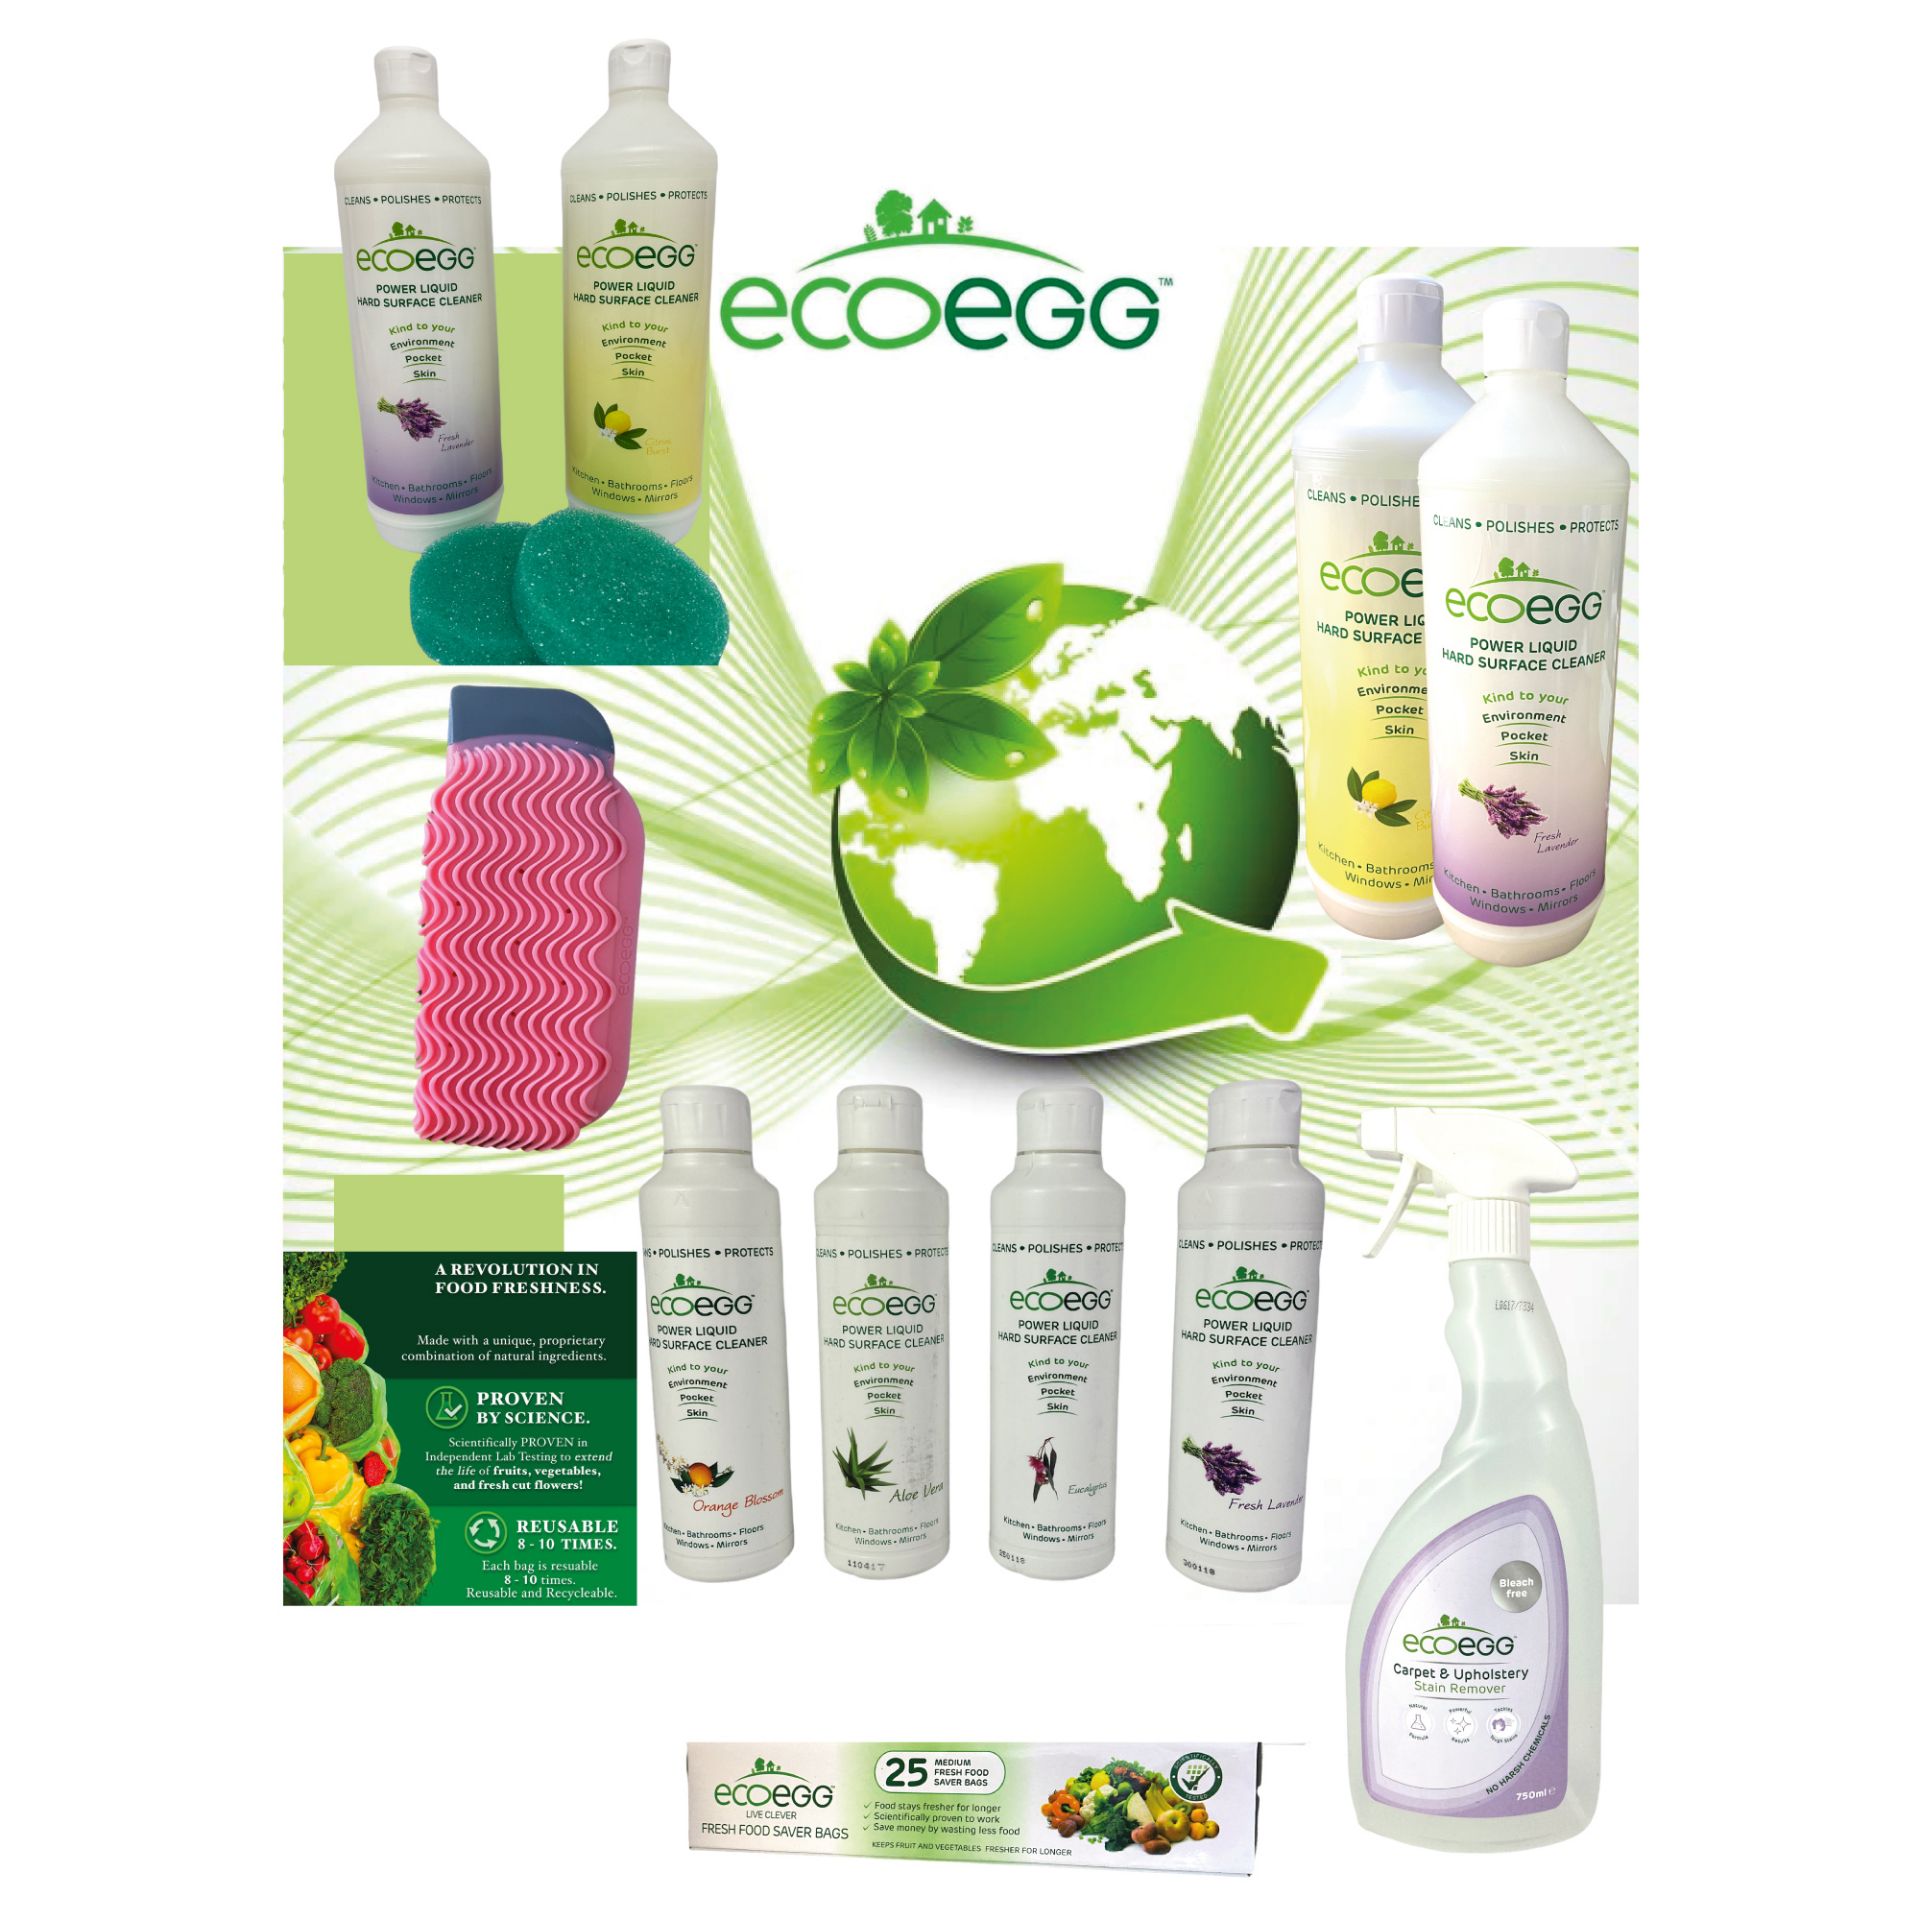 14,000 Units of Ecoegg Hard Surface Cleaner | Food Fresh Bags | Sponges and more | RRP £90,000+